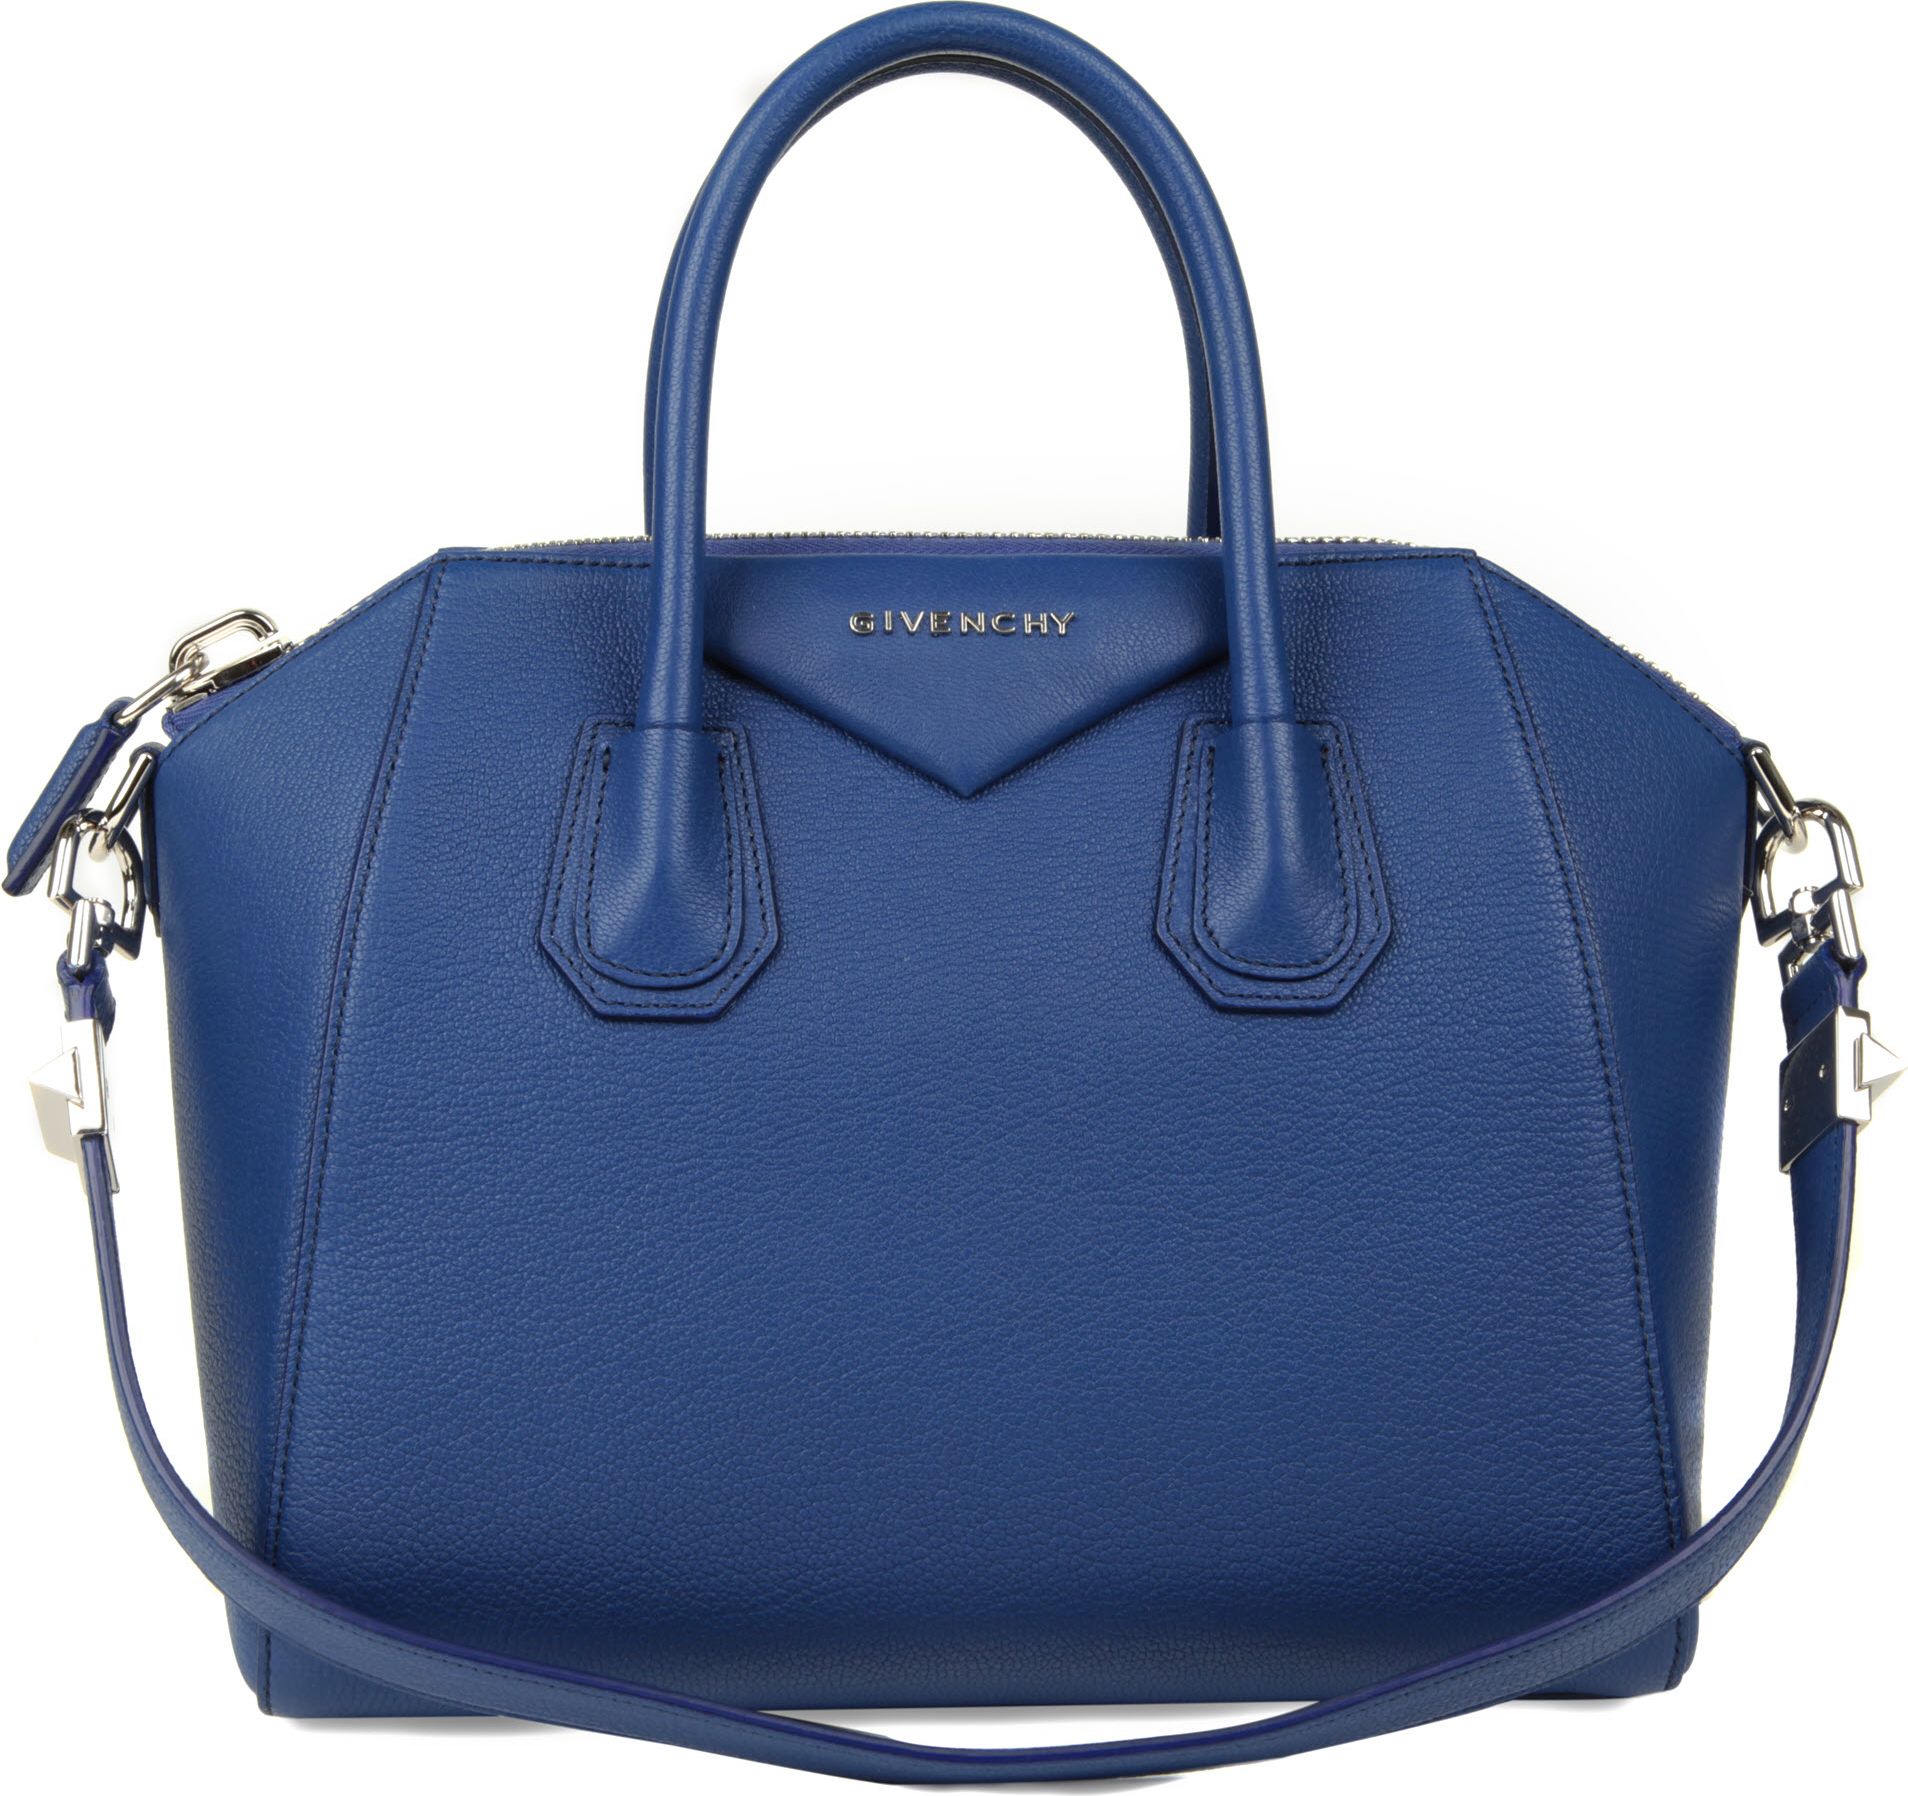 Givenchy Antigona Small Grainy Leather Tote in Blue | Lyst